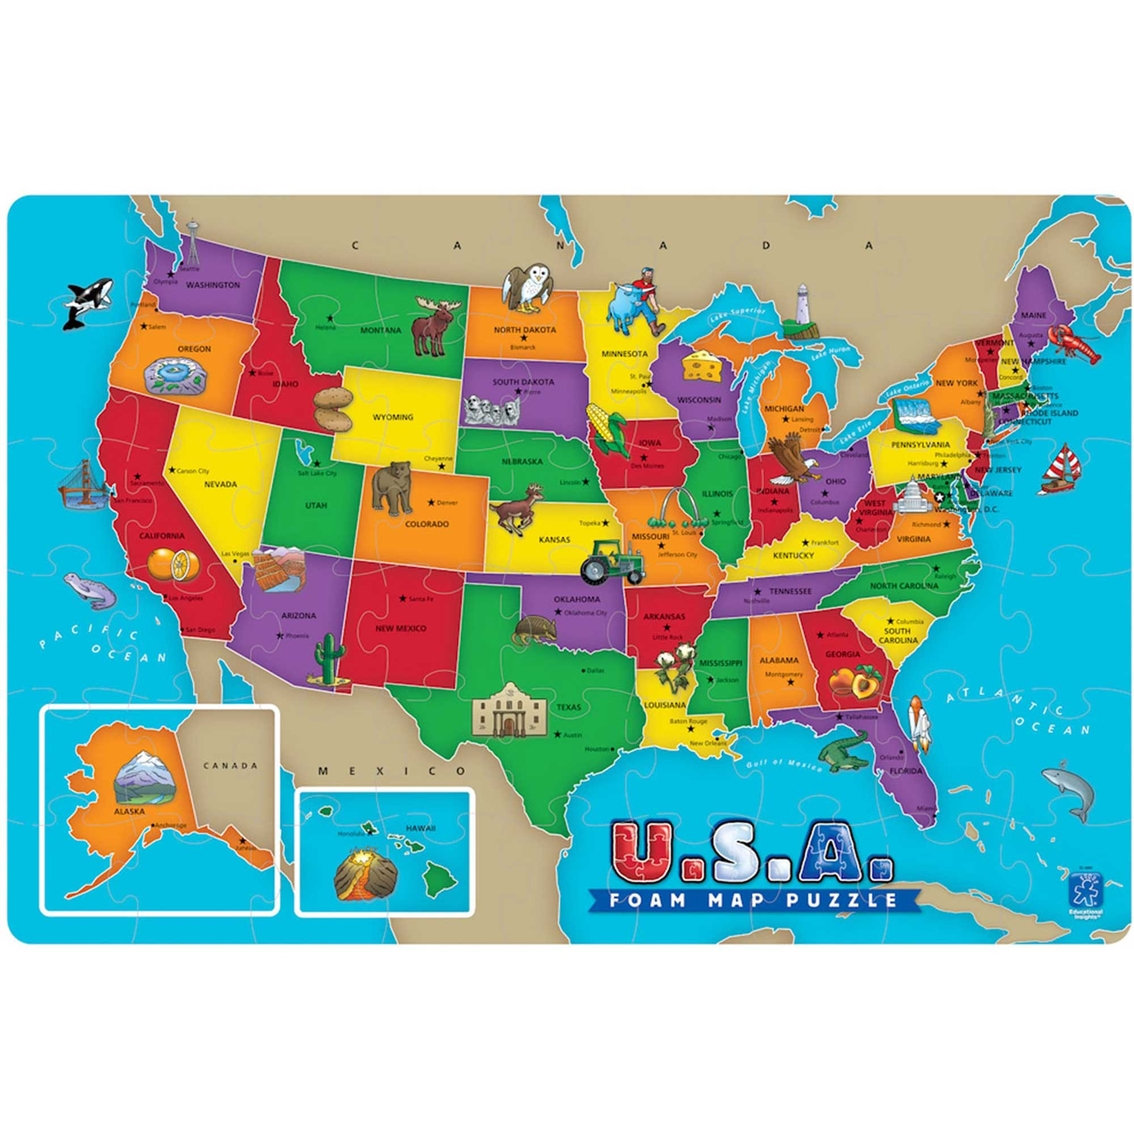 Learning Resources U.S.A. Foam Map Puzzle - Image 2 of 3